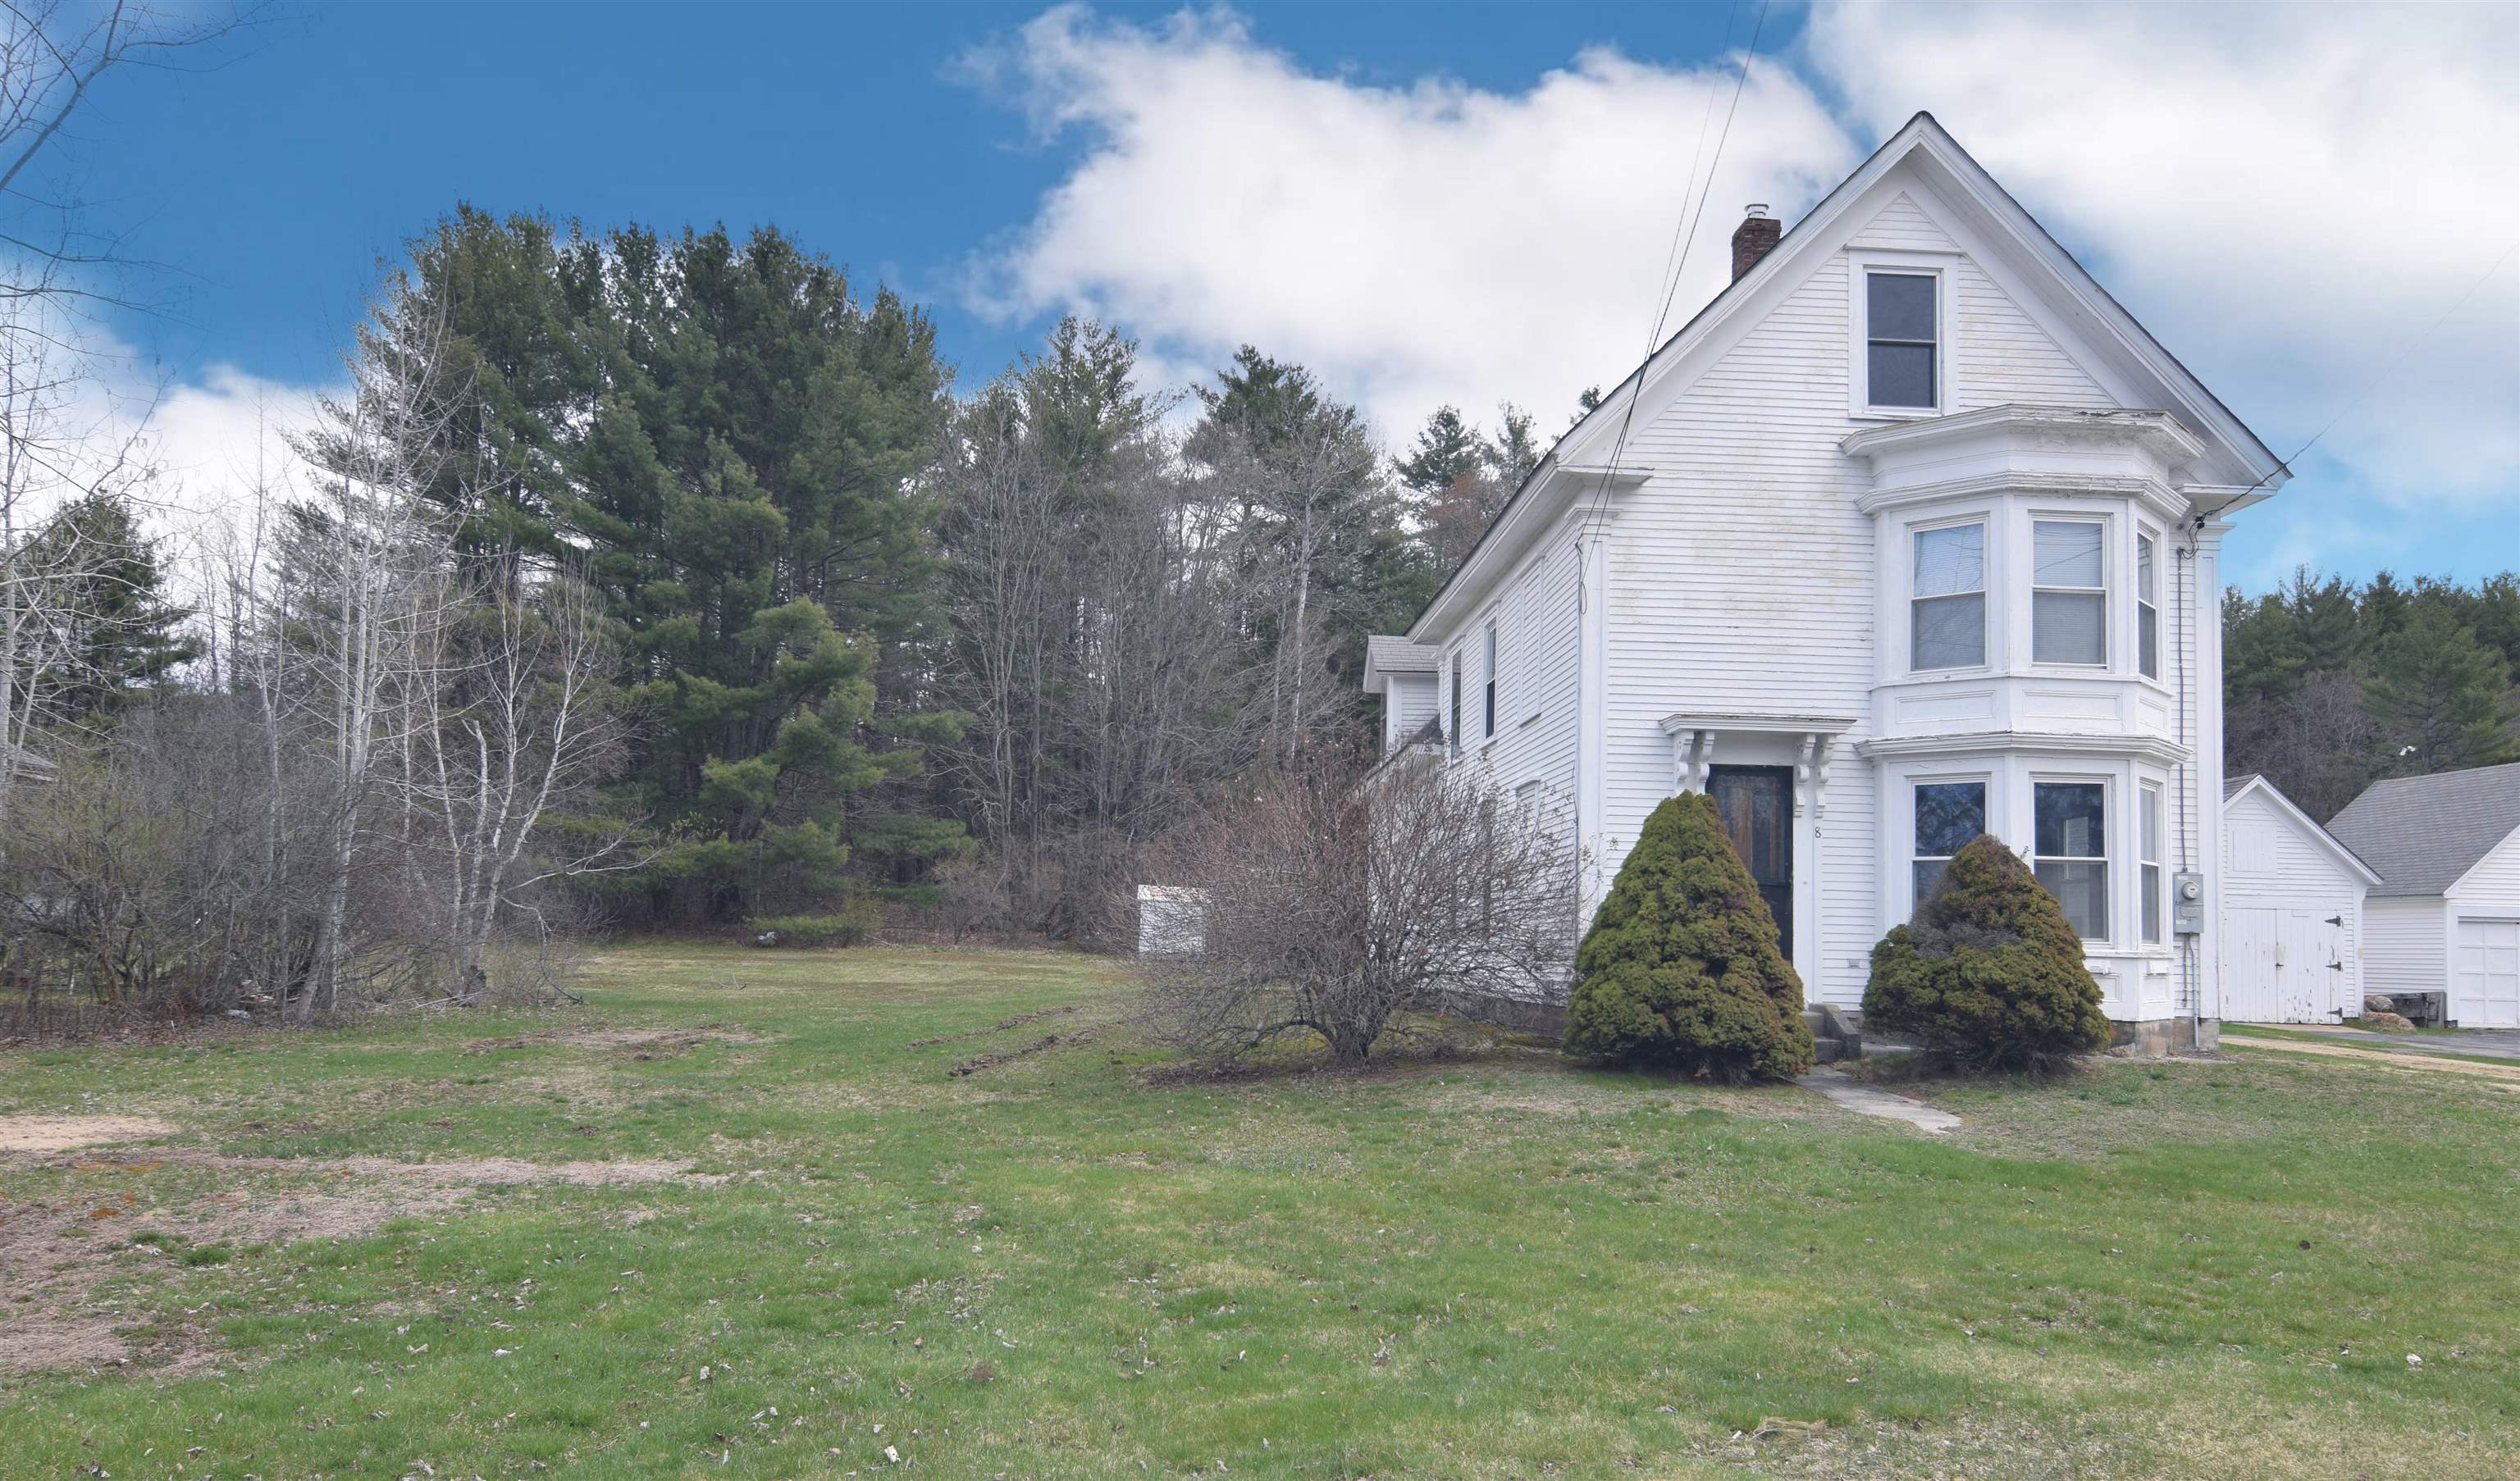 Newport NH 03773 Home for sale $List Price is $229,900